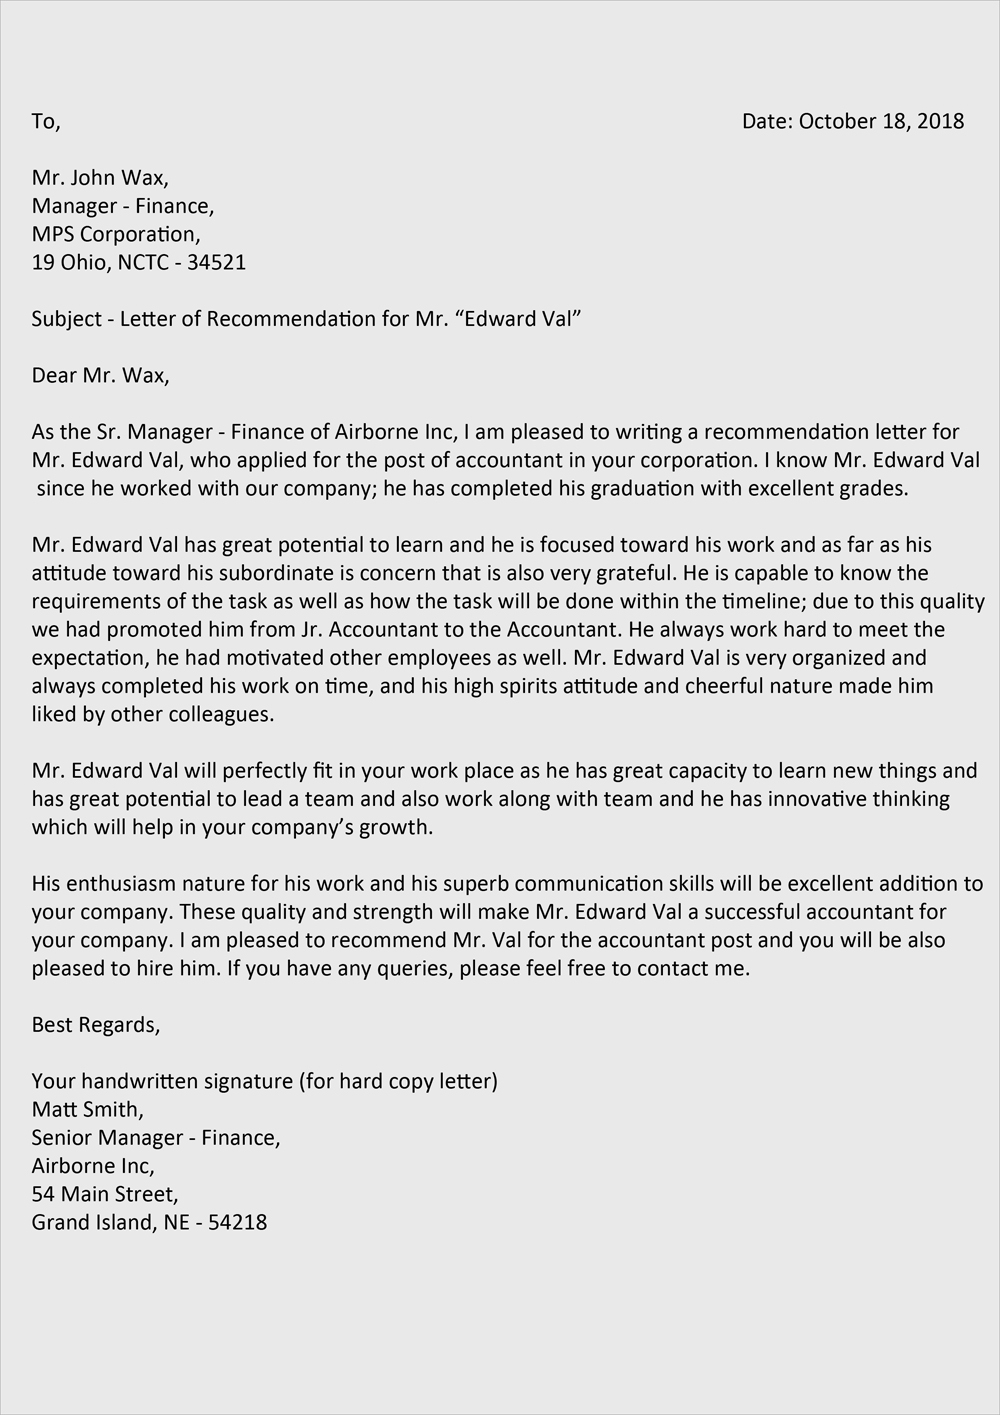 Make Letter Recommendation Employment Debandje within dimensions 1000 X 1415